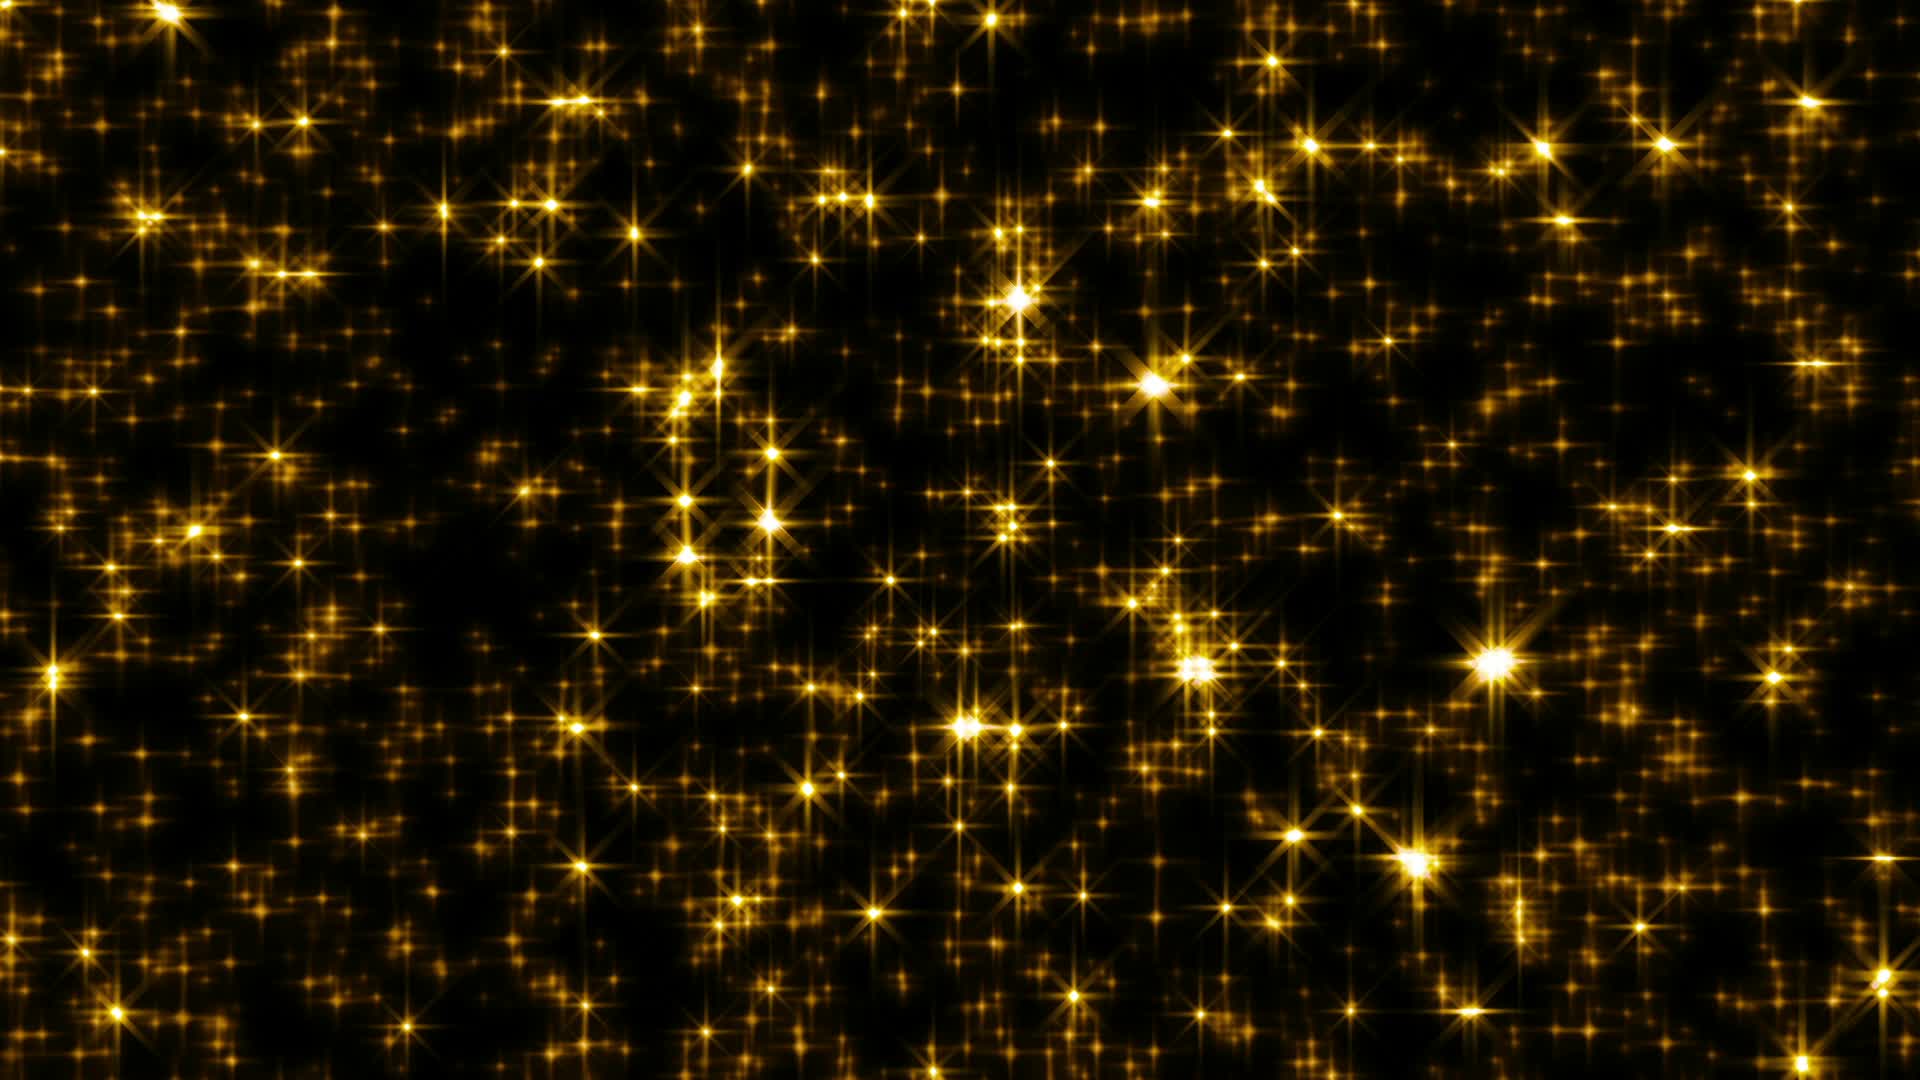 Free download Golden Glitter Star Light Brighter Stars Loop Stock Video 12660111 [1920x1080] for your Desktop, Mobile & Tablet. Explore Gold Star Wallpaper. Star Wallpaper for Walls, Gold and